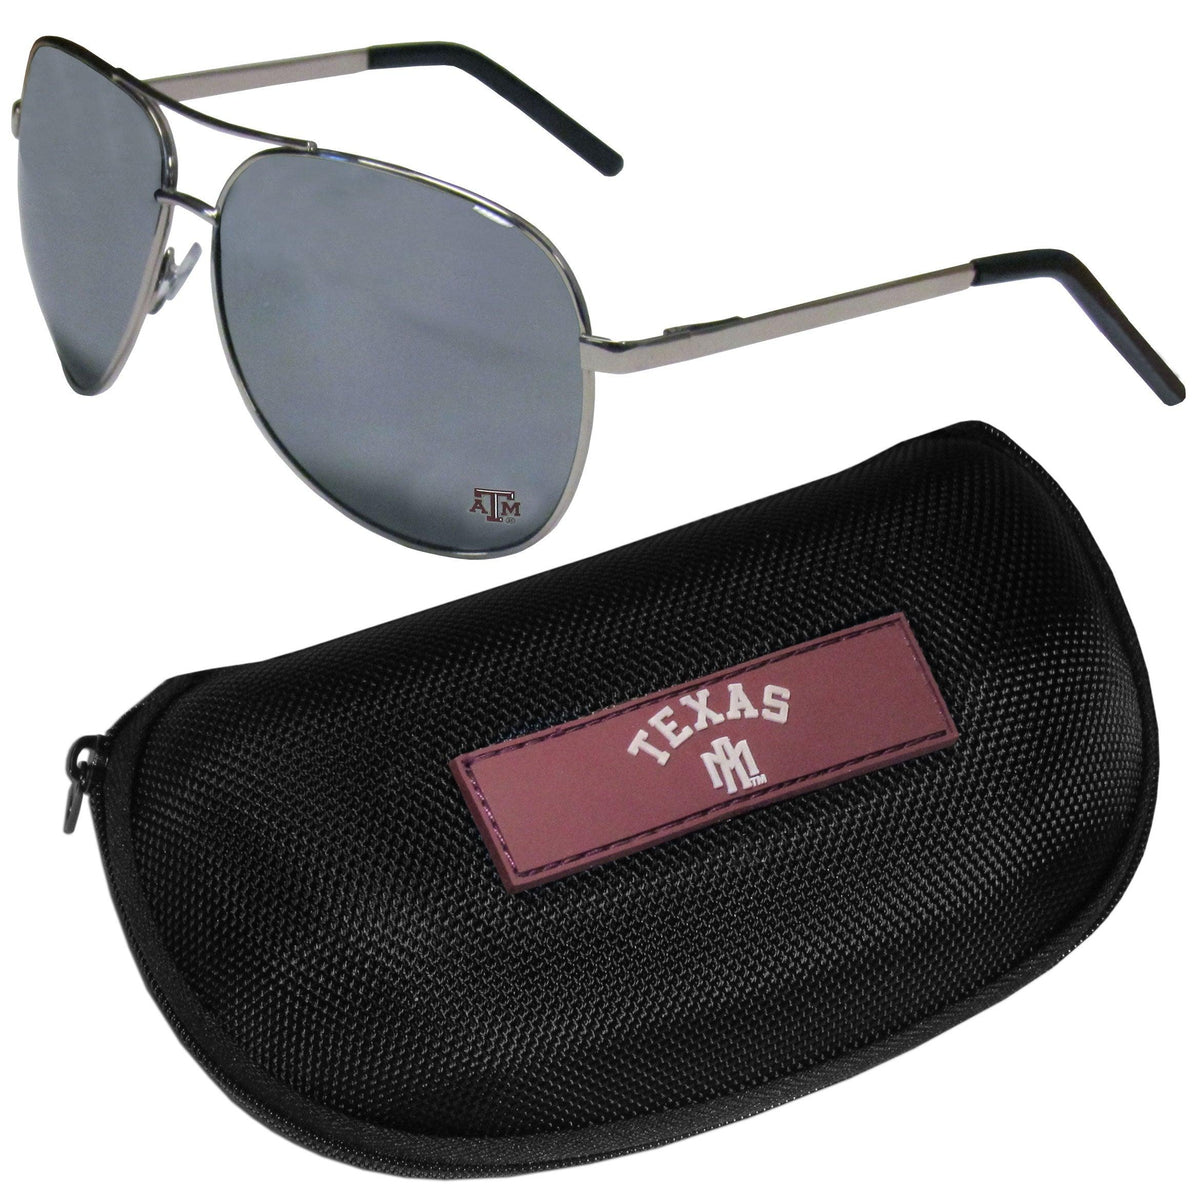 Texas A & M Aggies Aviator Sunglasses and Zippered Carrying Case - Flyclothing LLC